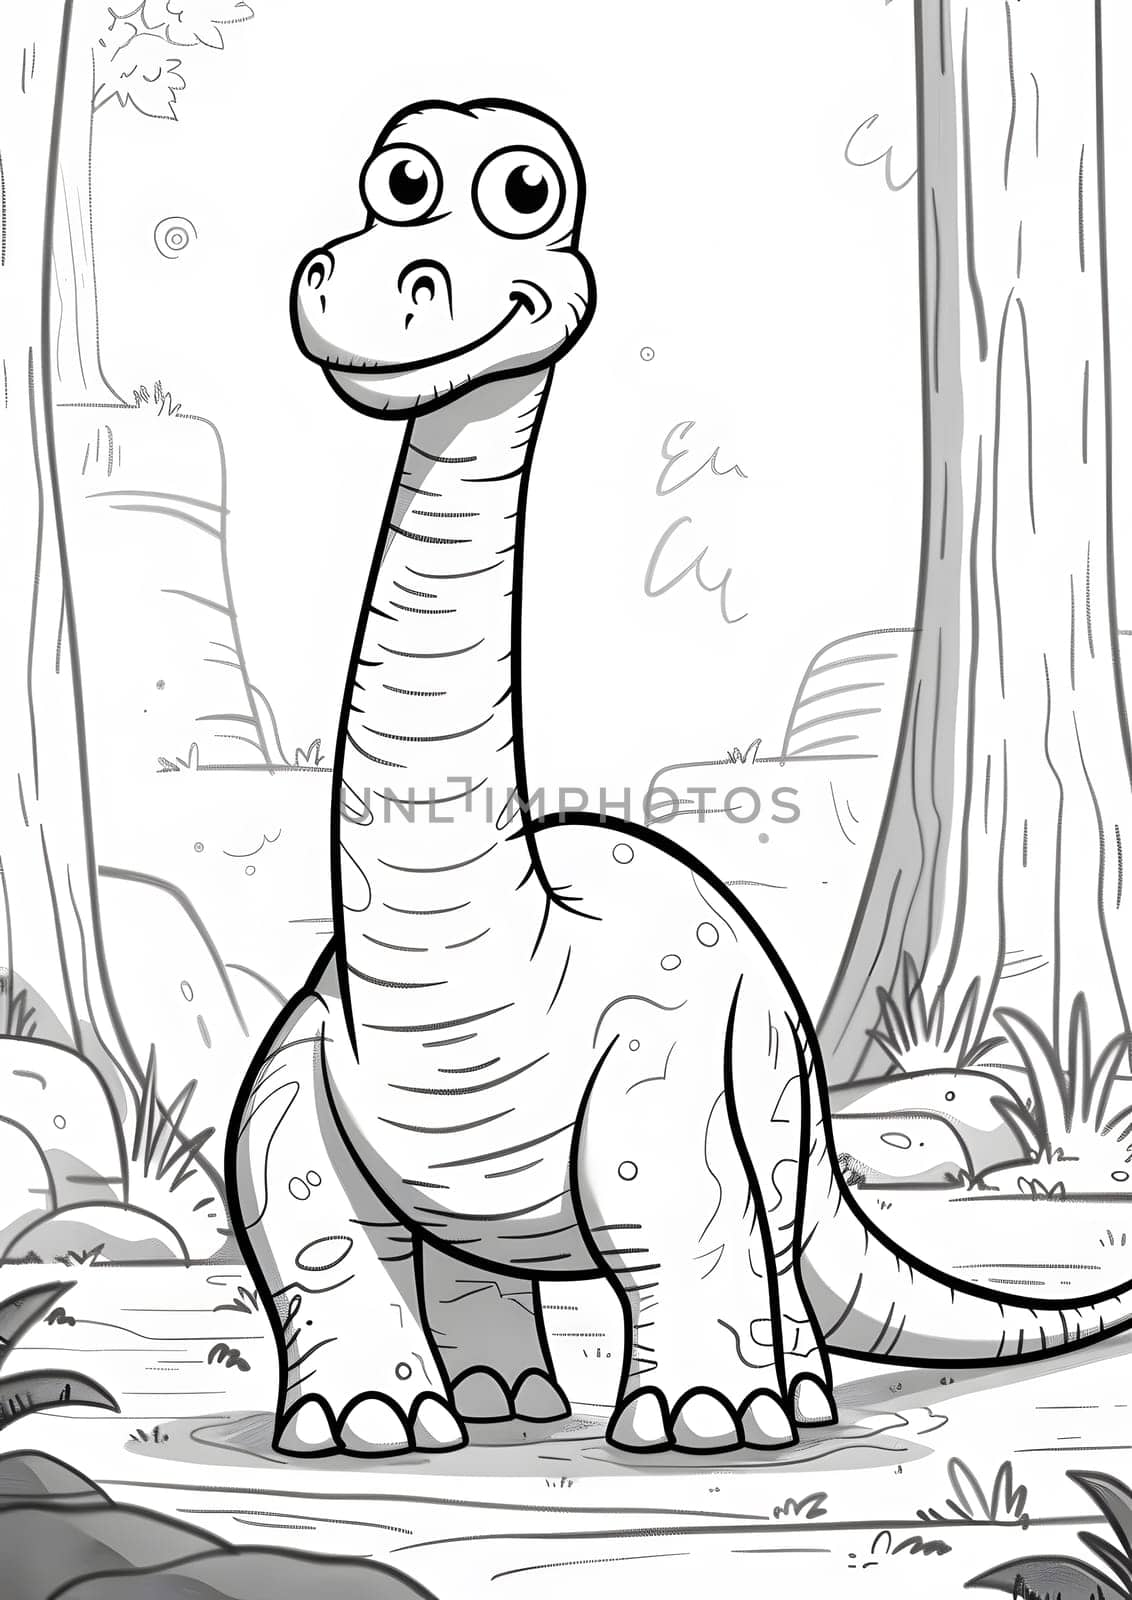 An illustration of a happy dinosaur, a terrestrial animal with a powerful jaw and tail, standing in the woods. The black and white drawing showcases the adaptation of this ancient organism